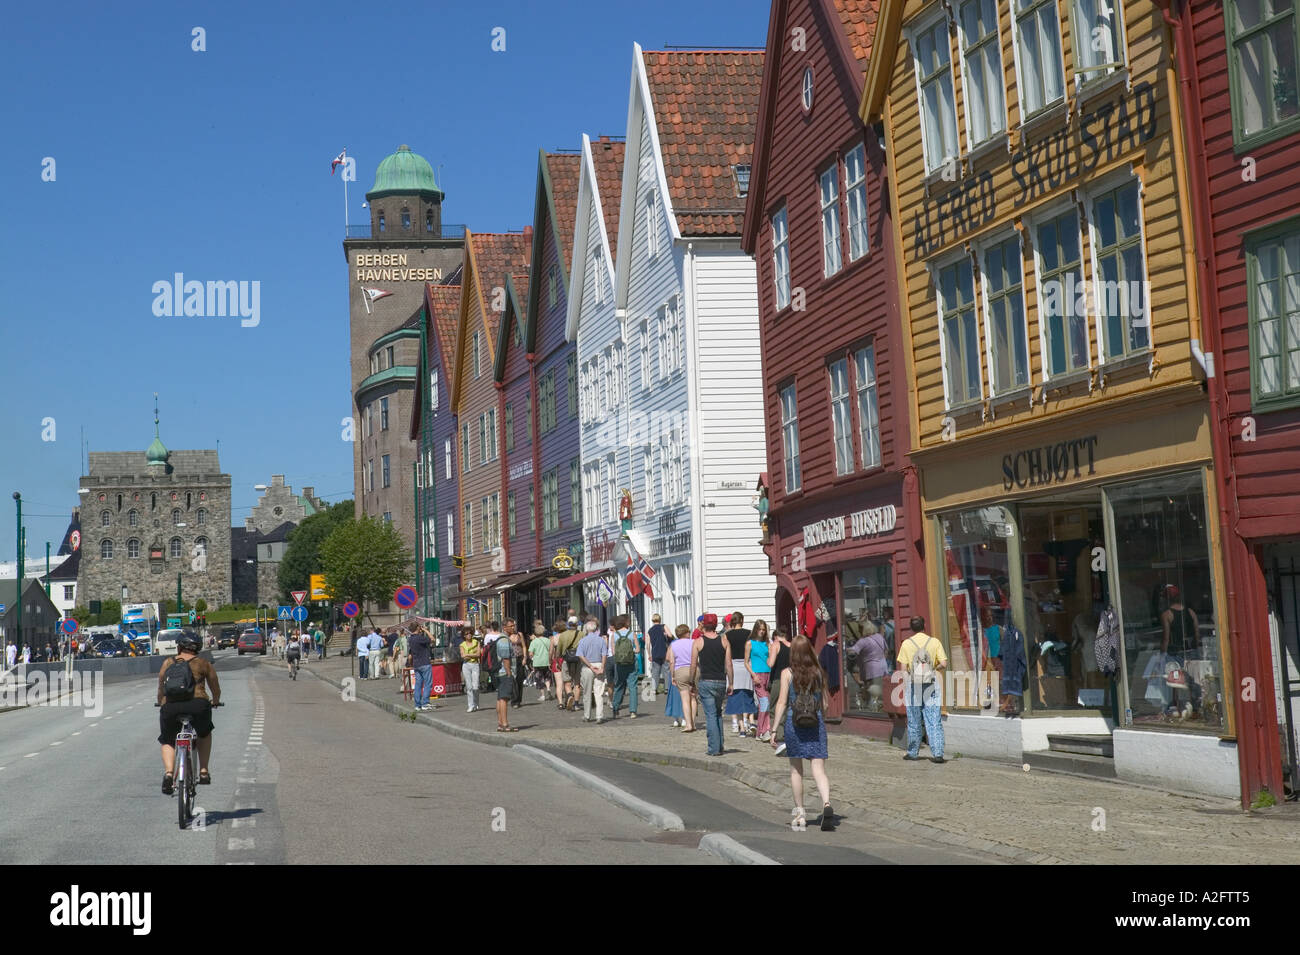 Shoppers stroll in Bryggen, UNESCO World Heritage Site, ancient wood buildings along the waterfront Stock Photo